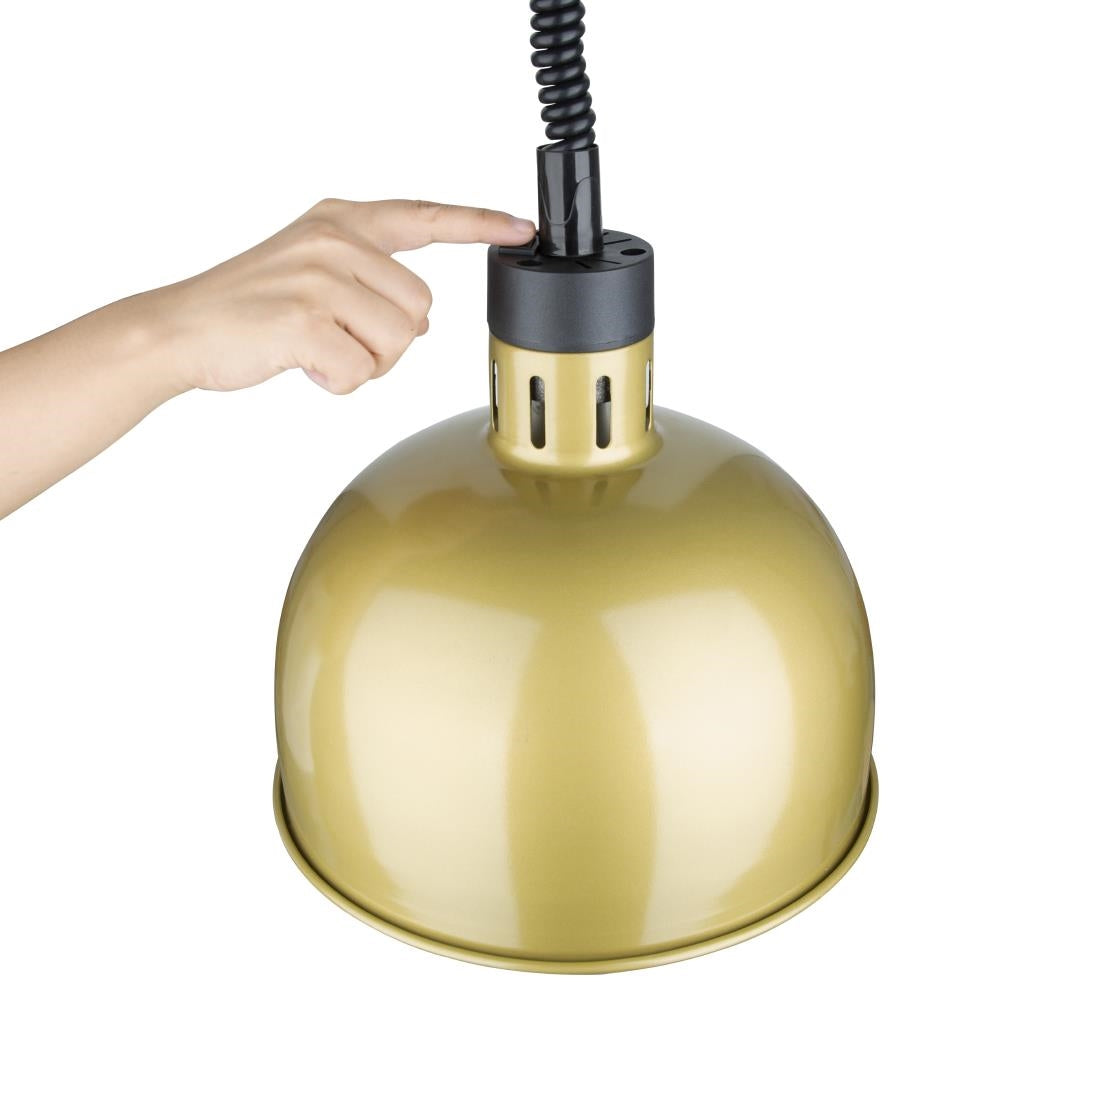 Buffalo Retractable Dome Heat Shade Pale Gold Finish JD Catering Equipment Solutions Ltd